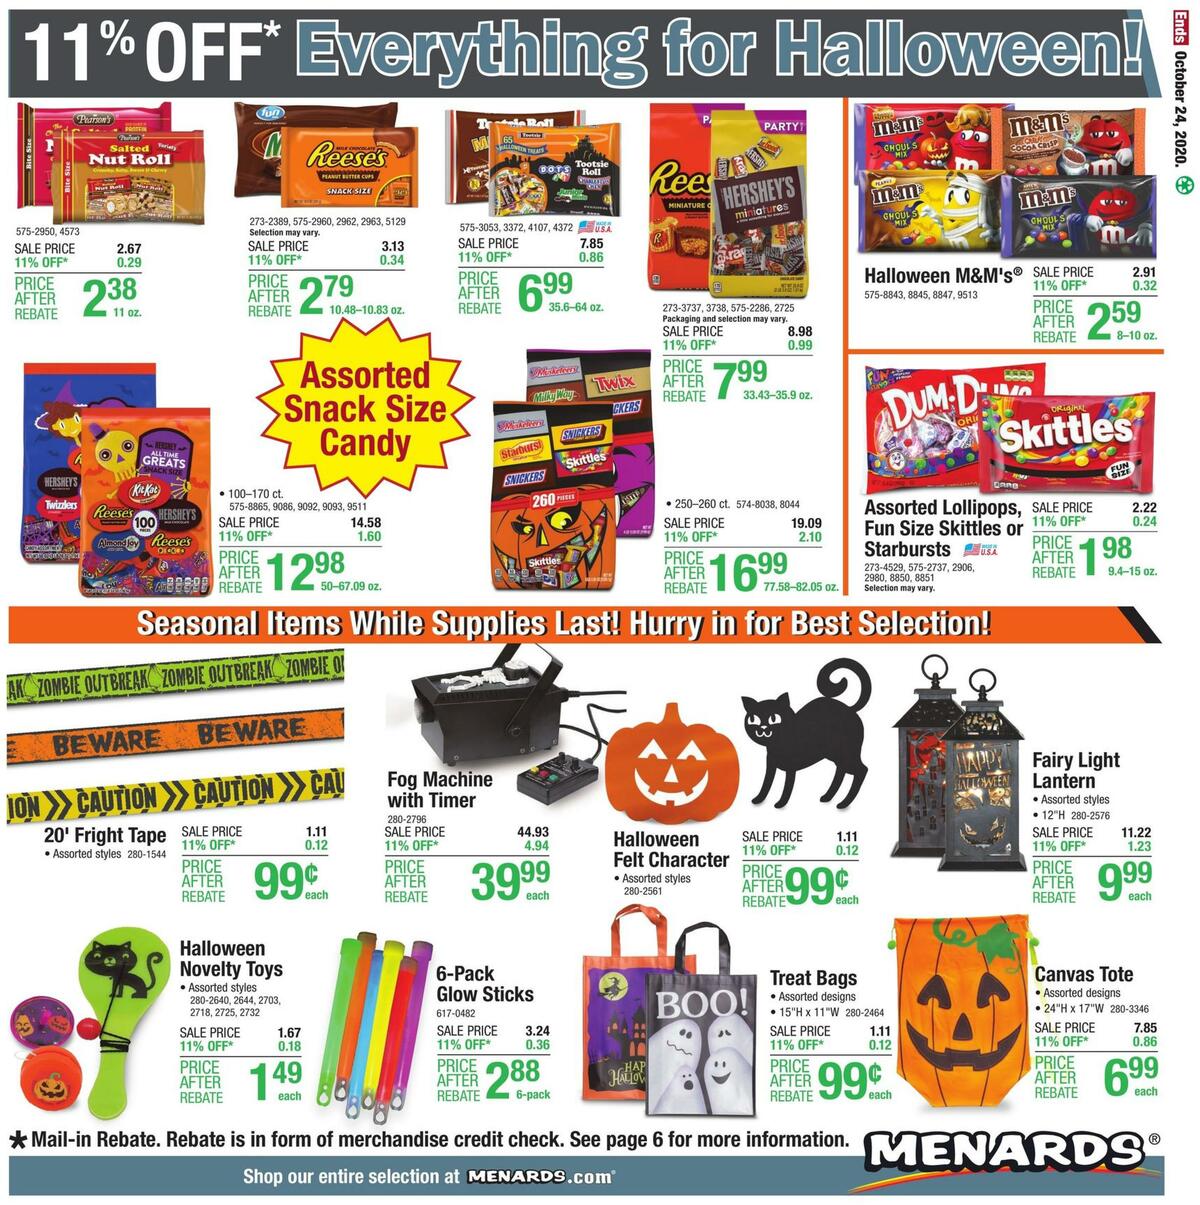 Menards Weekly Ad from October 18